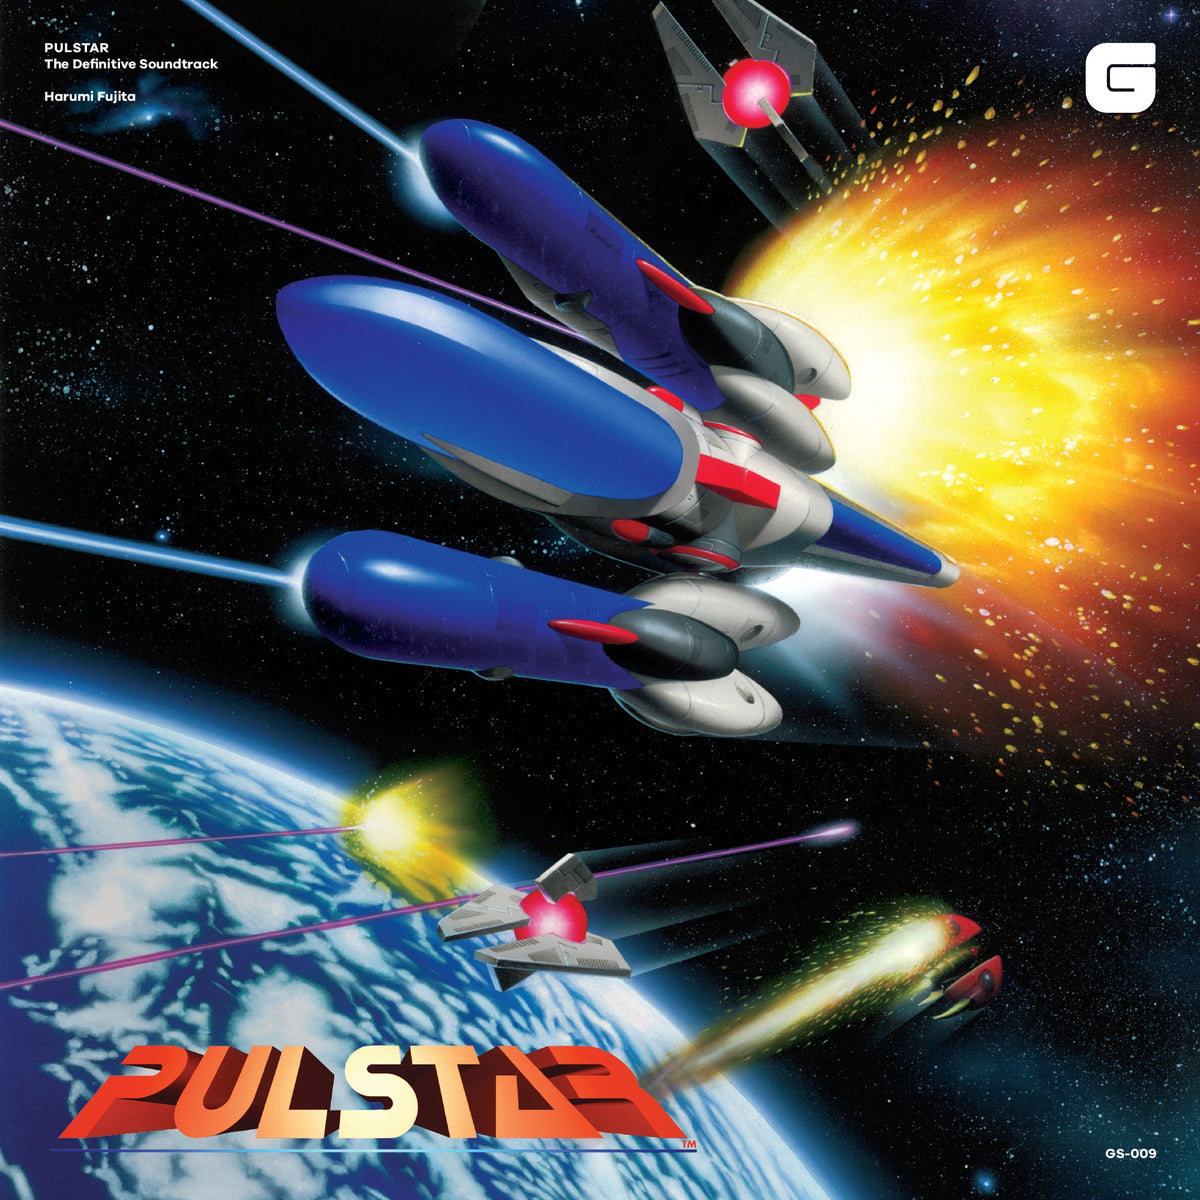 PULSTAR The Definitive Soundtrack - Limited